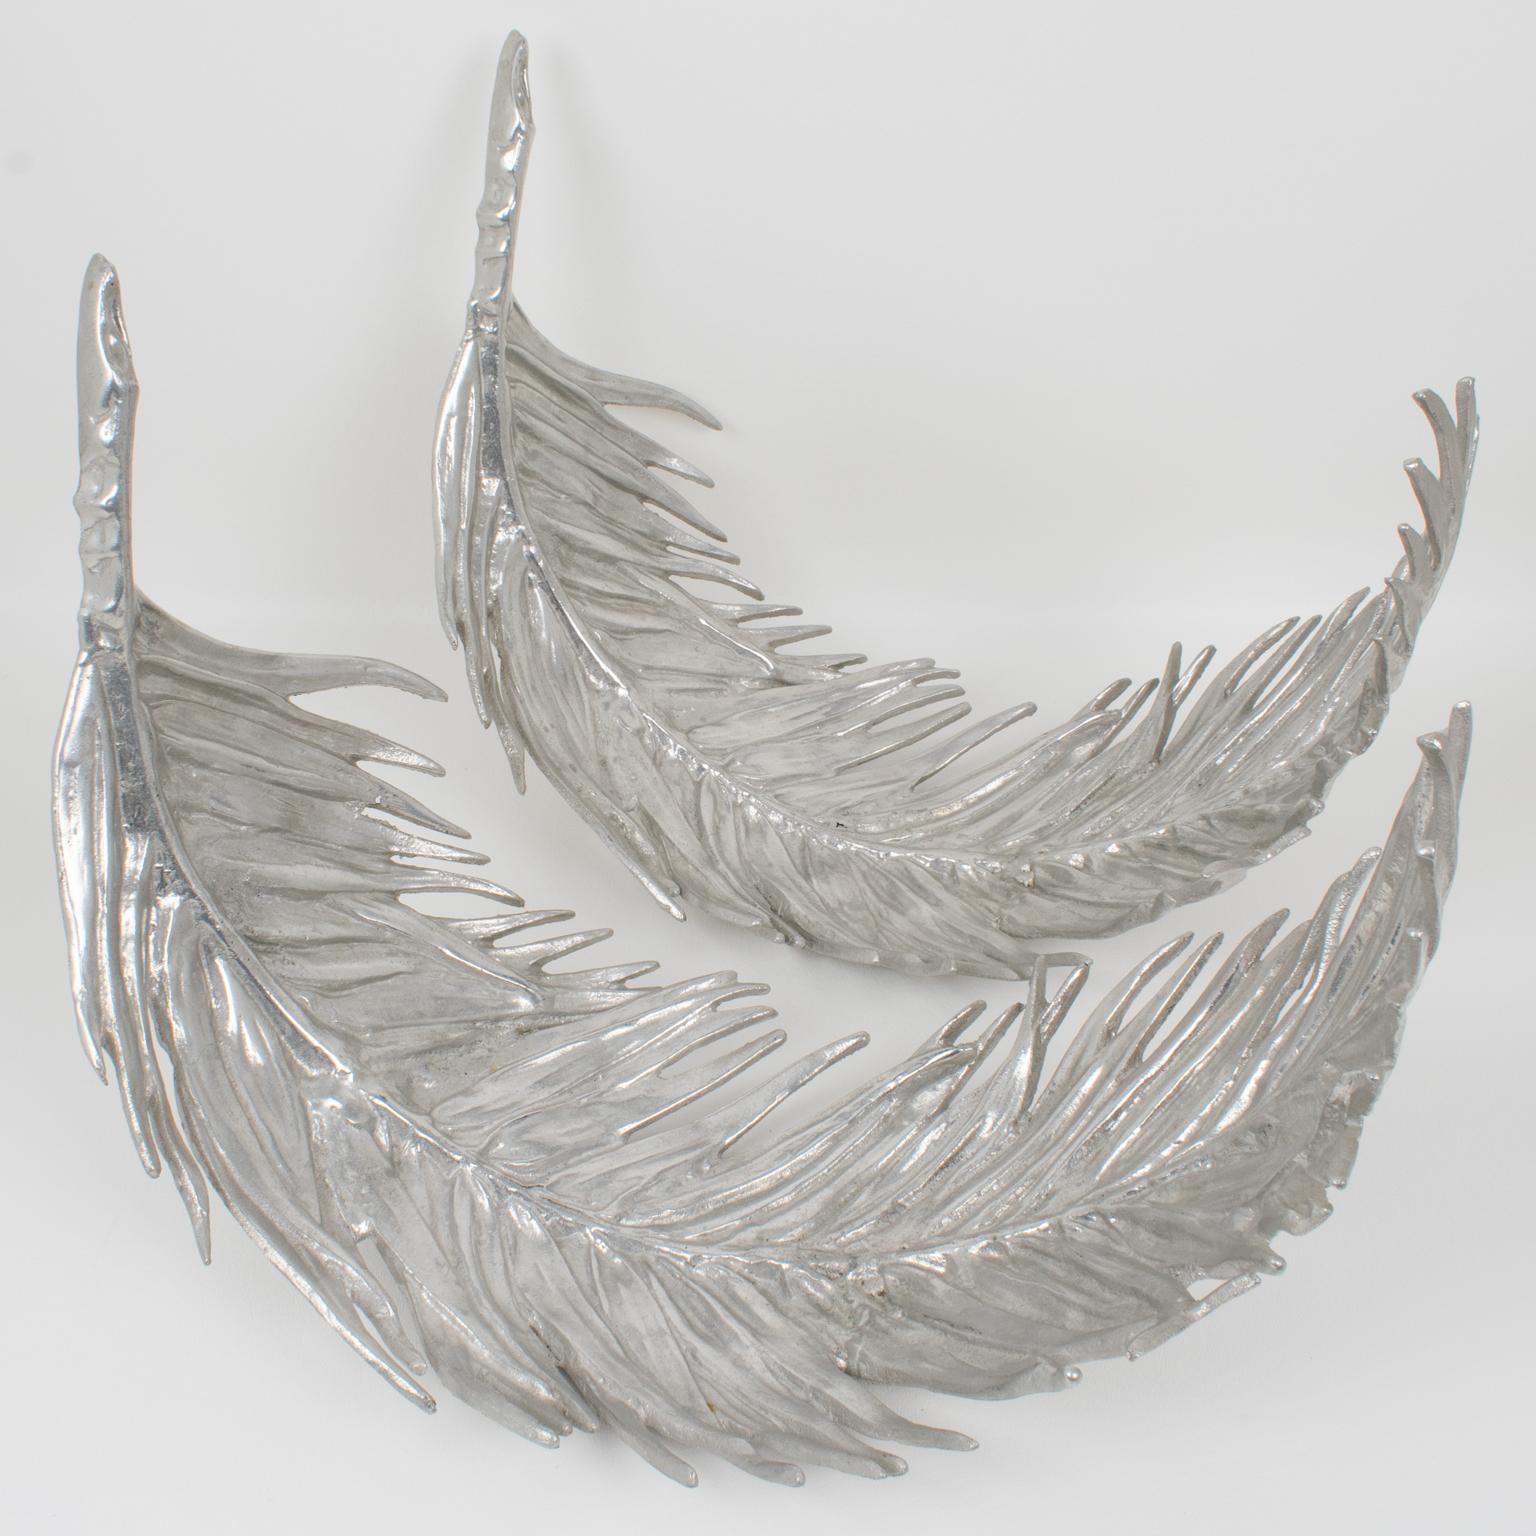 These outstanding aluminum palm frond centerpieces are rare finds from Arthur Court's (1928-2015) production. A highly decorative set of two polished cast aluminum trays featuring palm tree leaves. These pieces are oversized and impressive in